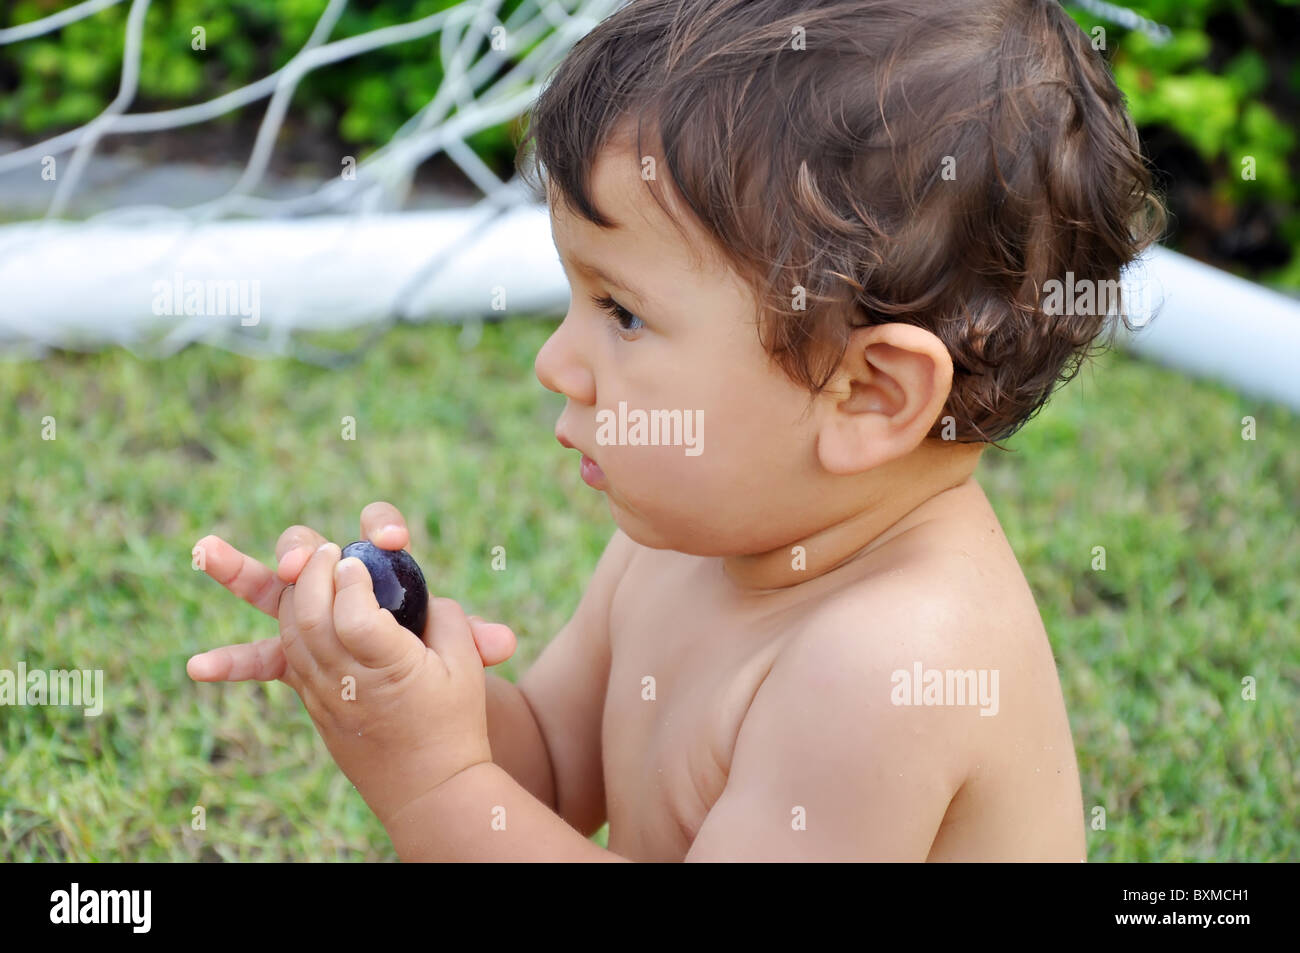 One year old boy eating grape on grass Stock Photo